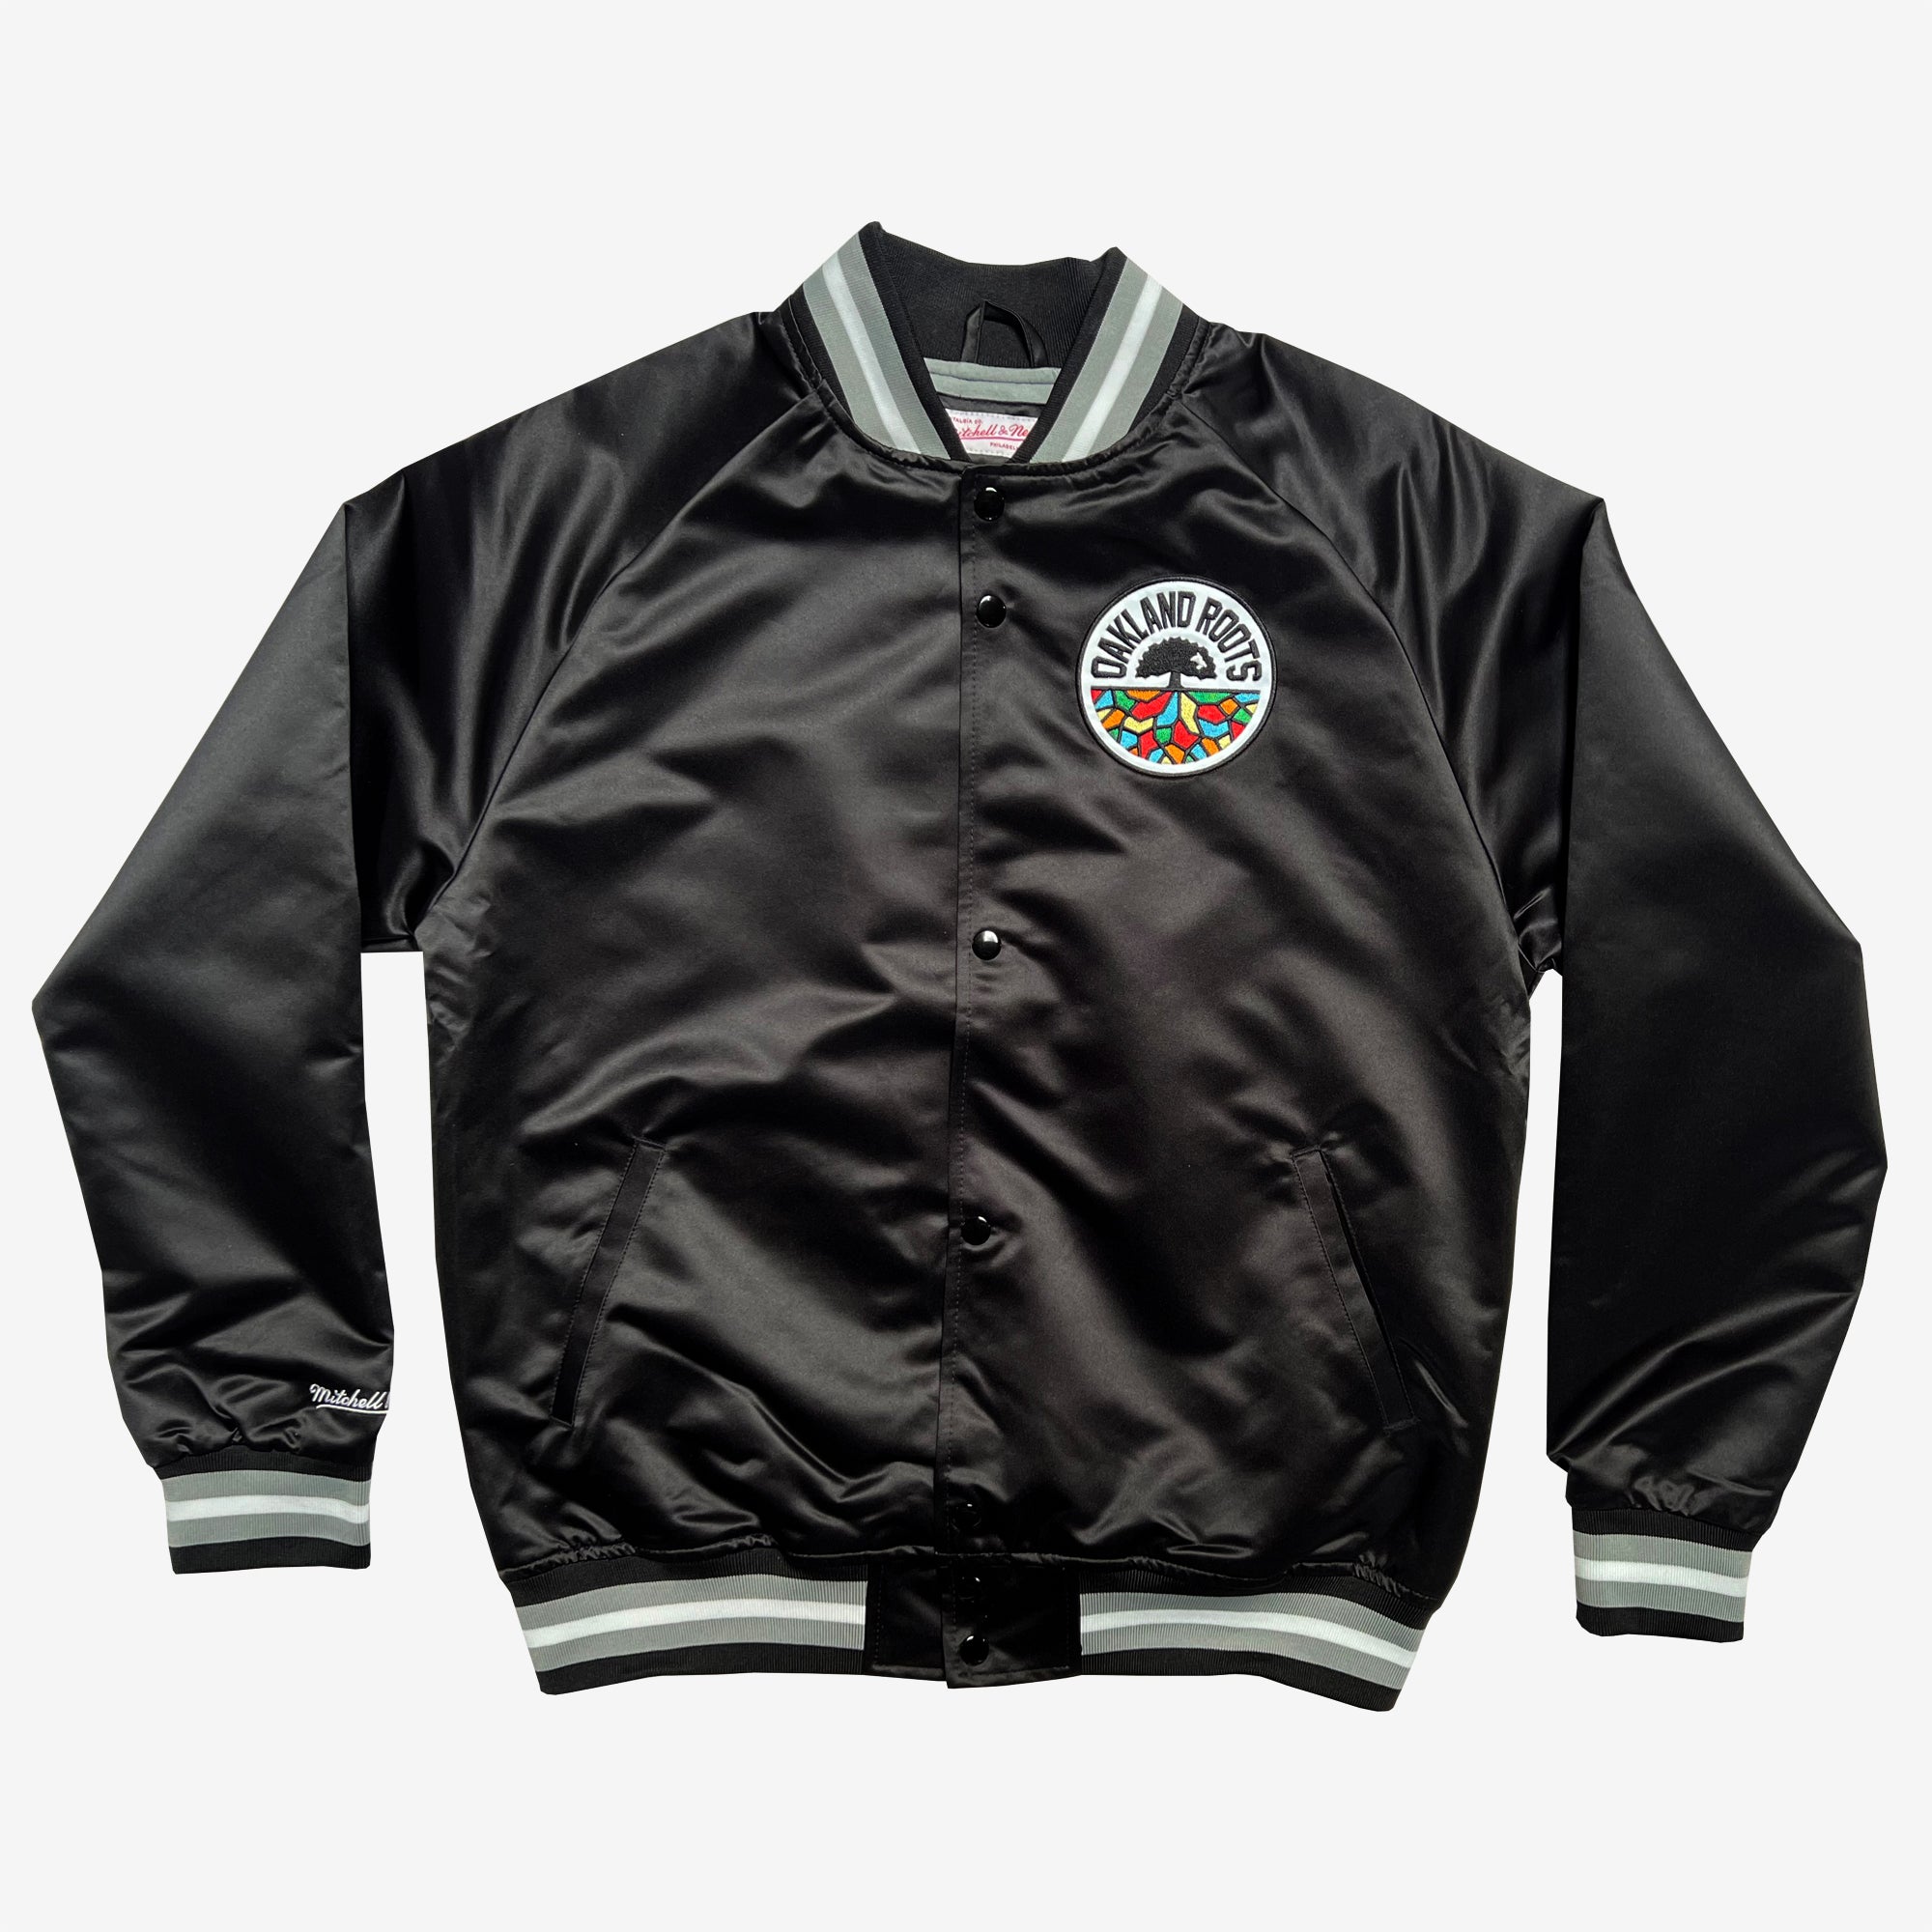 Black satin jacket with striped collar, sleeve cuffs, bottom trim, button closures, front pockets, and round Roots SC logo patch.